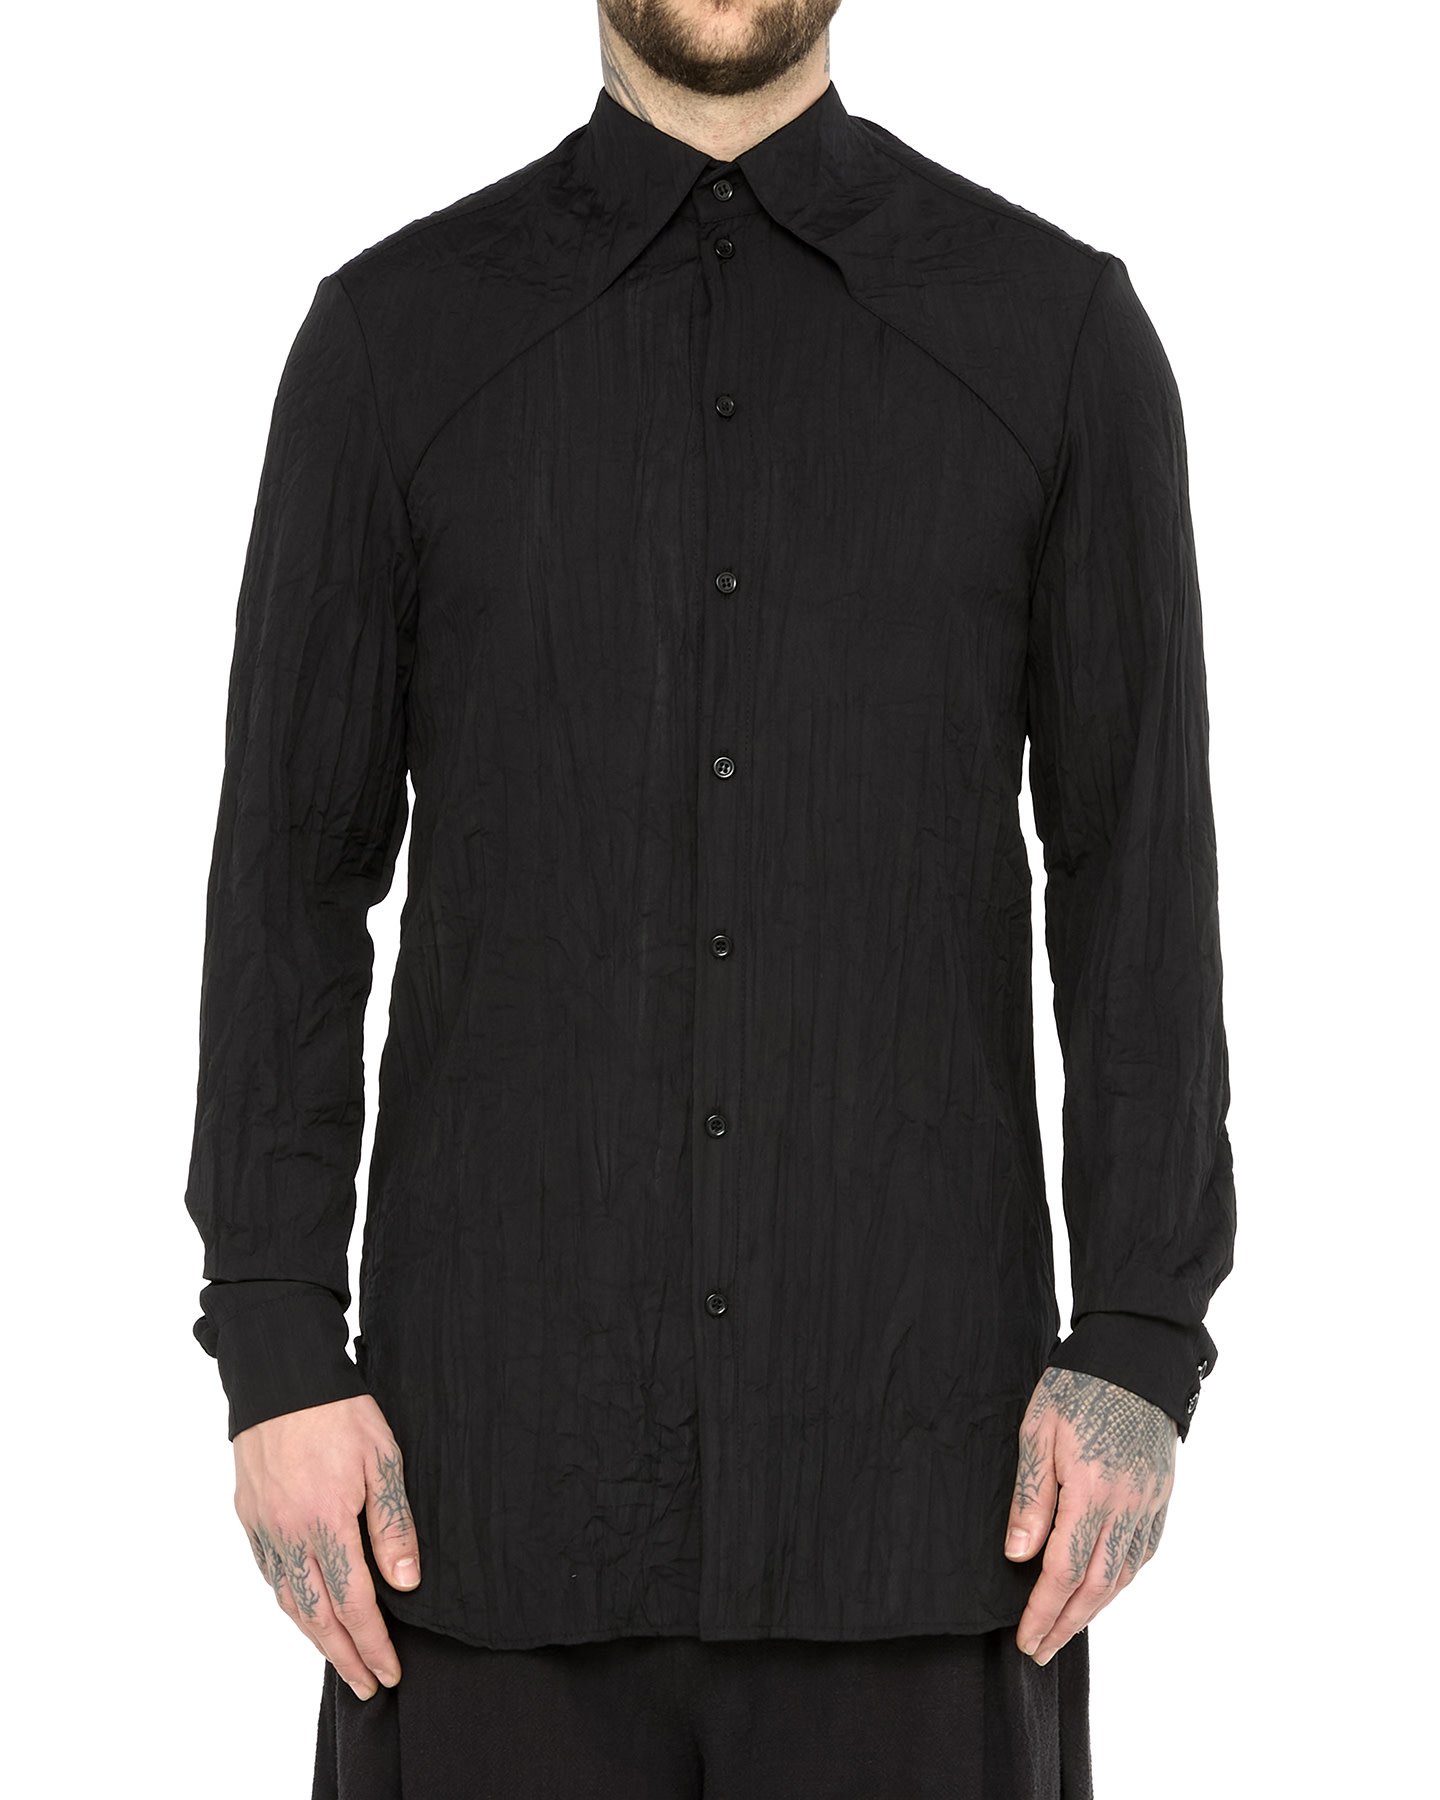 CRINKLED SHIRT WITH INTEGRATED COLLAR - BLACK